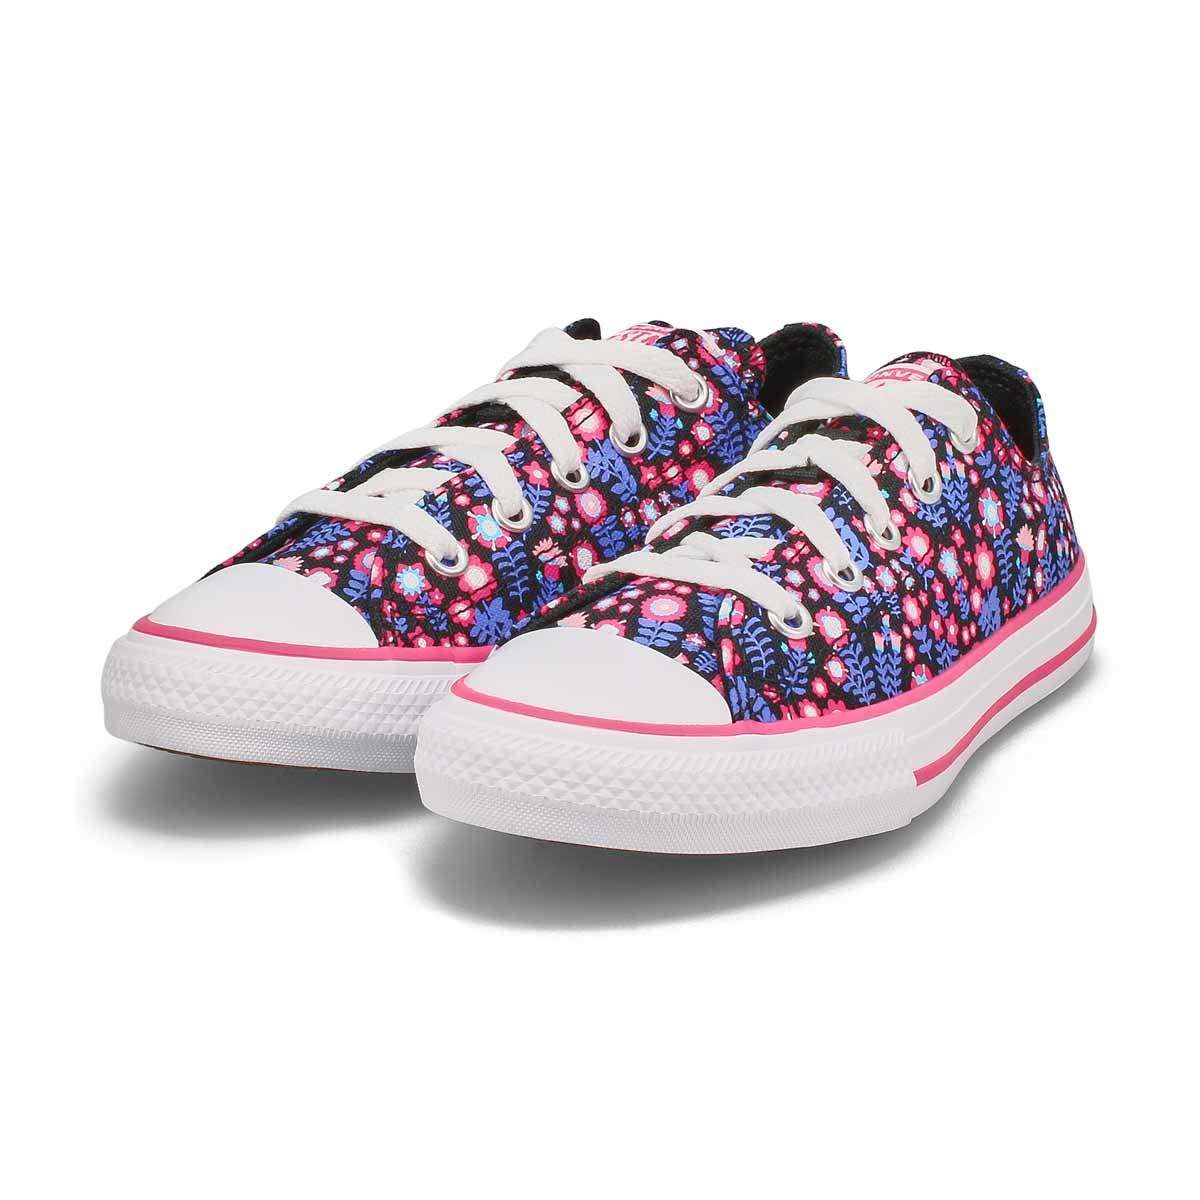 Girls' Chuck Taylor All Star Ditsy Floral sneaker